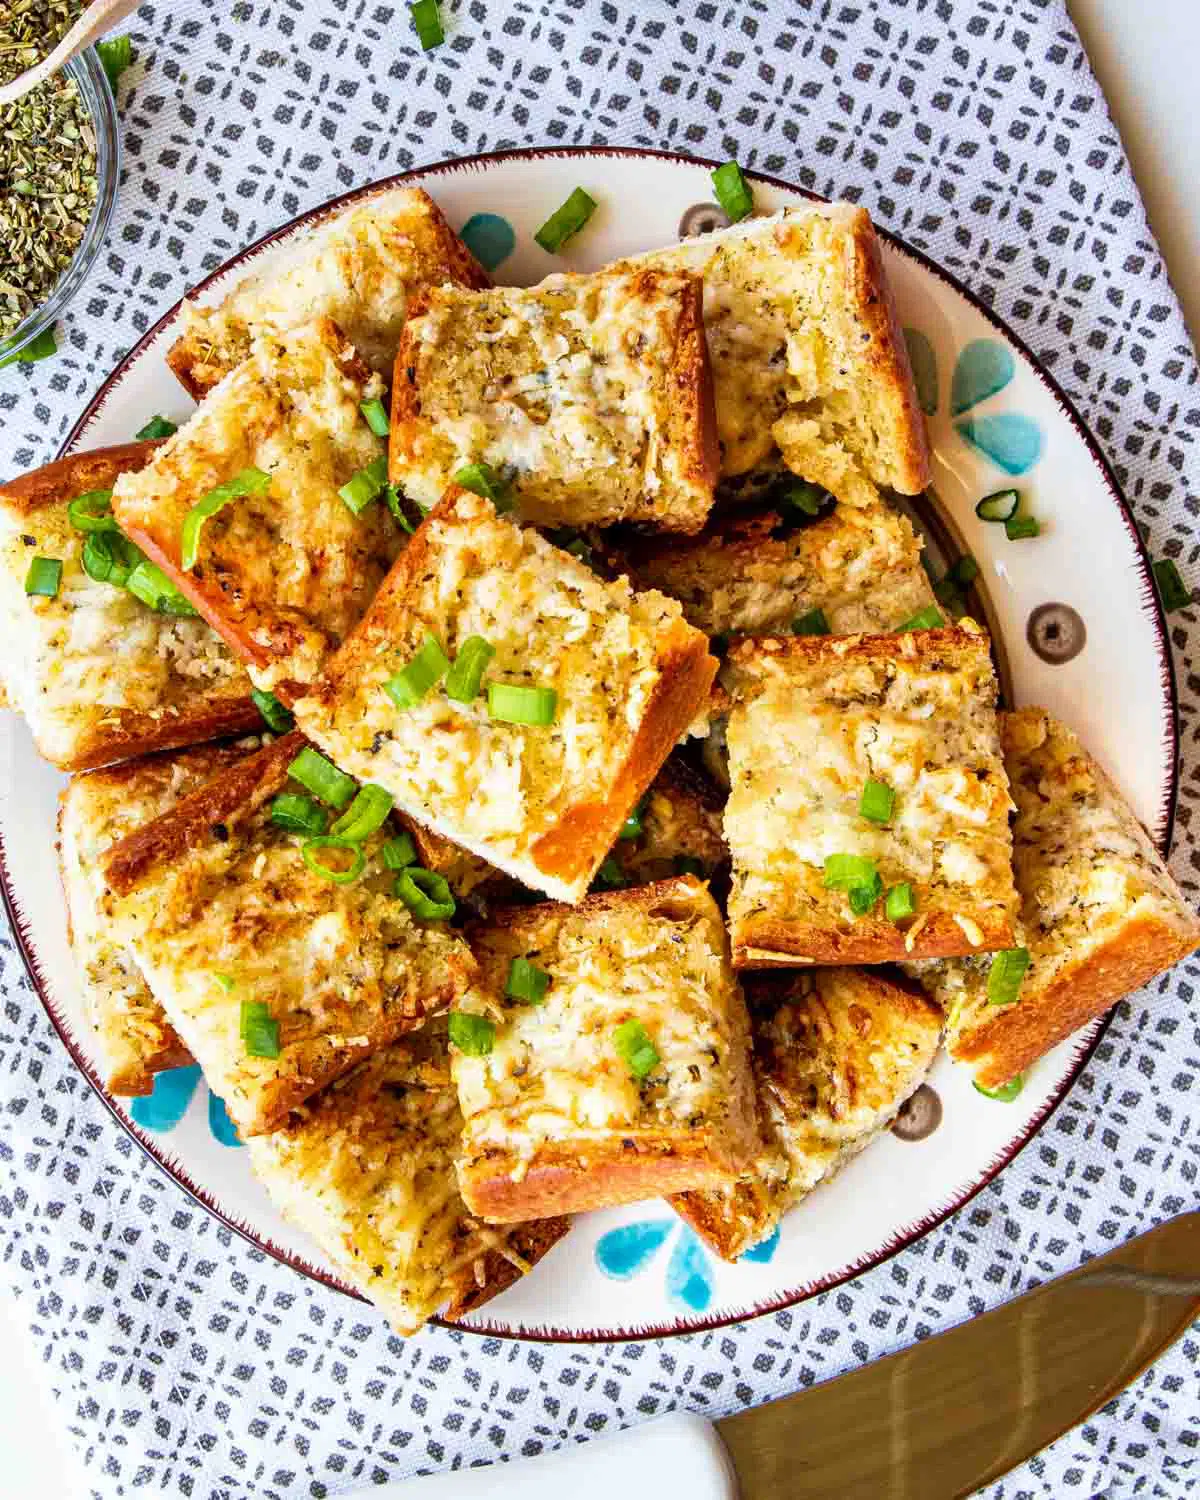 garlic bread cut up in slices on a plate garnished with green onions.